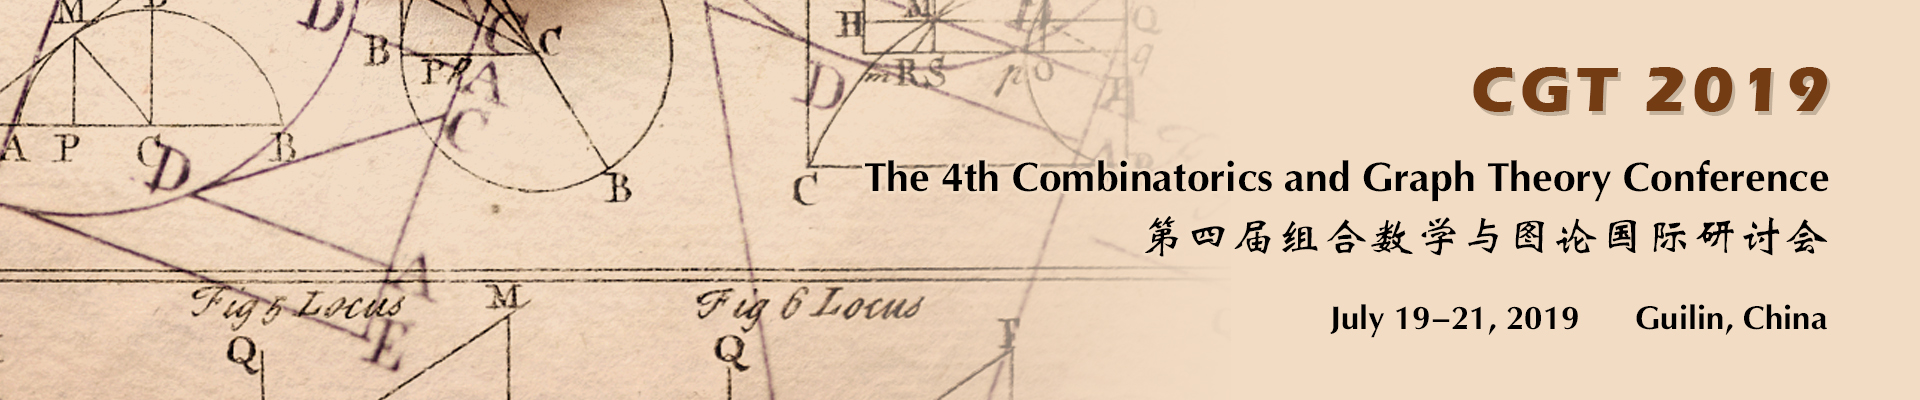 The 4th Combinatorics and Graph Theory Conference (CGT 2019), Guilin, Guangxi, China